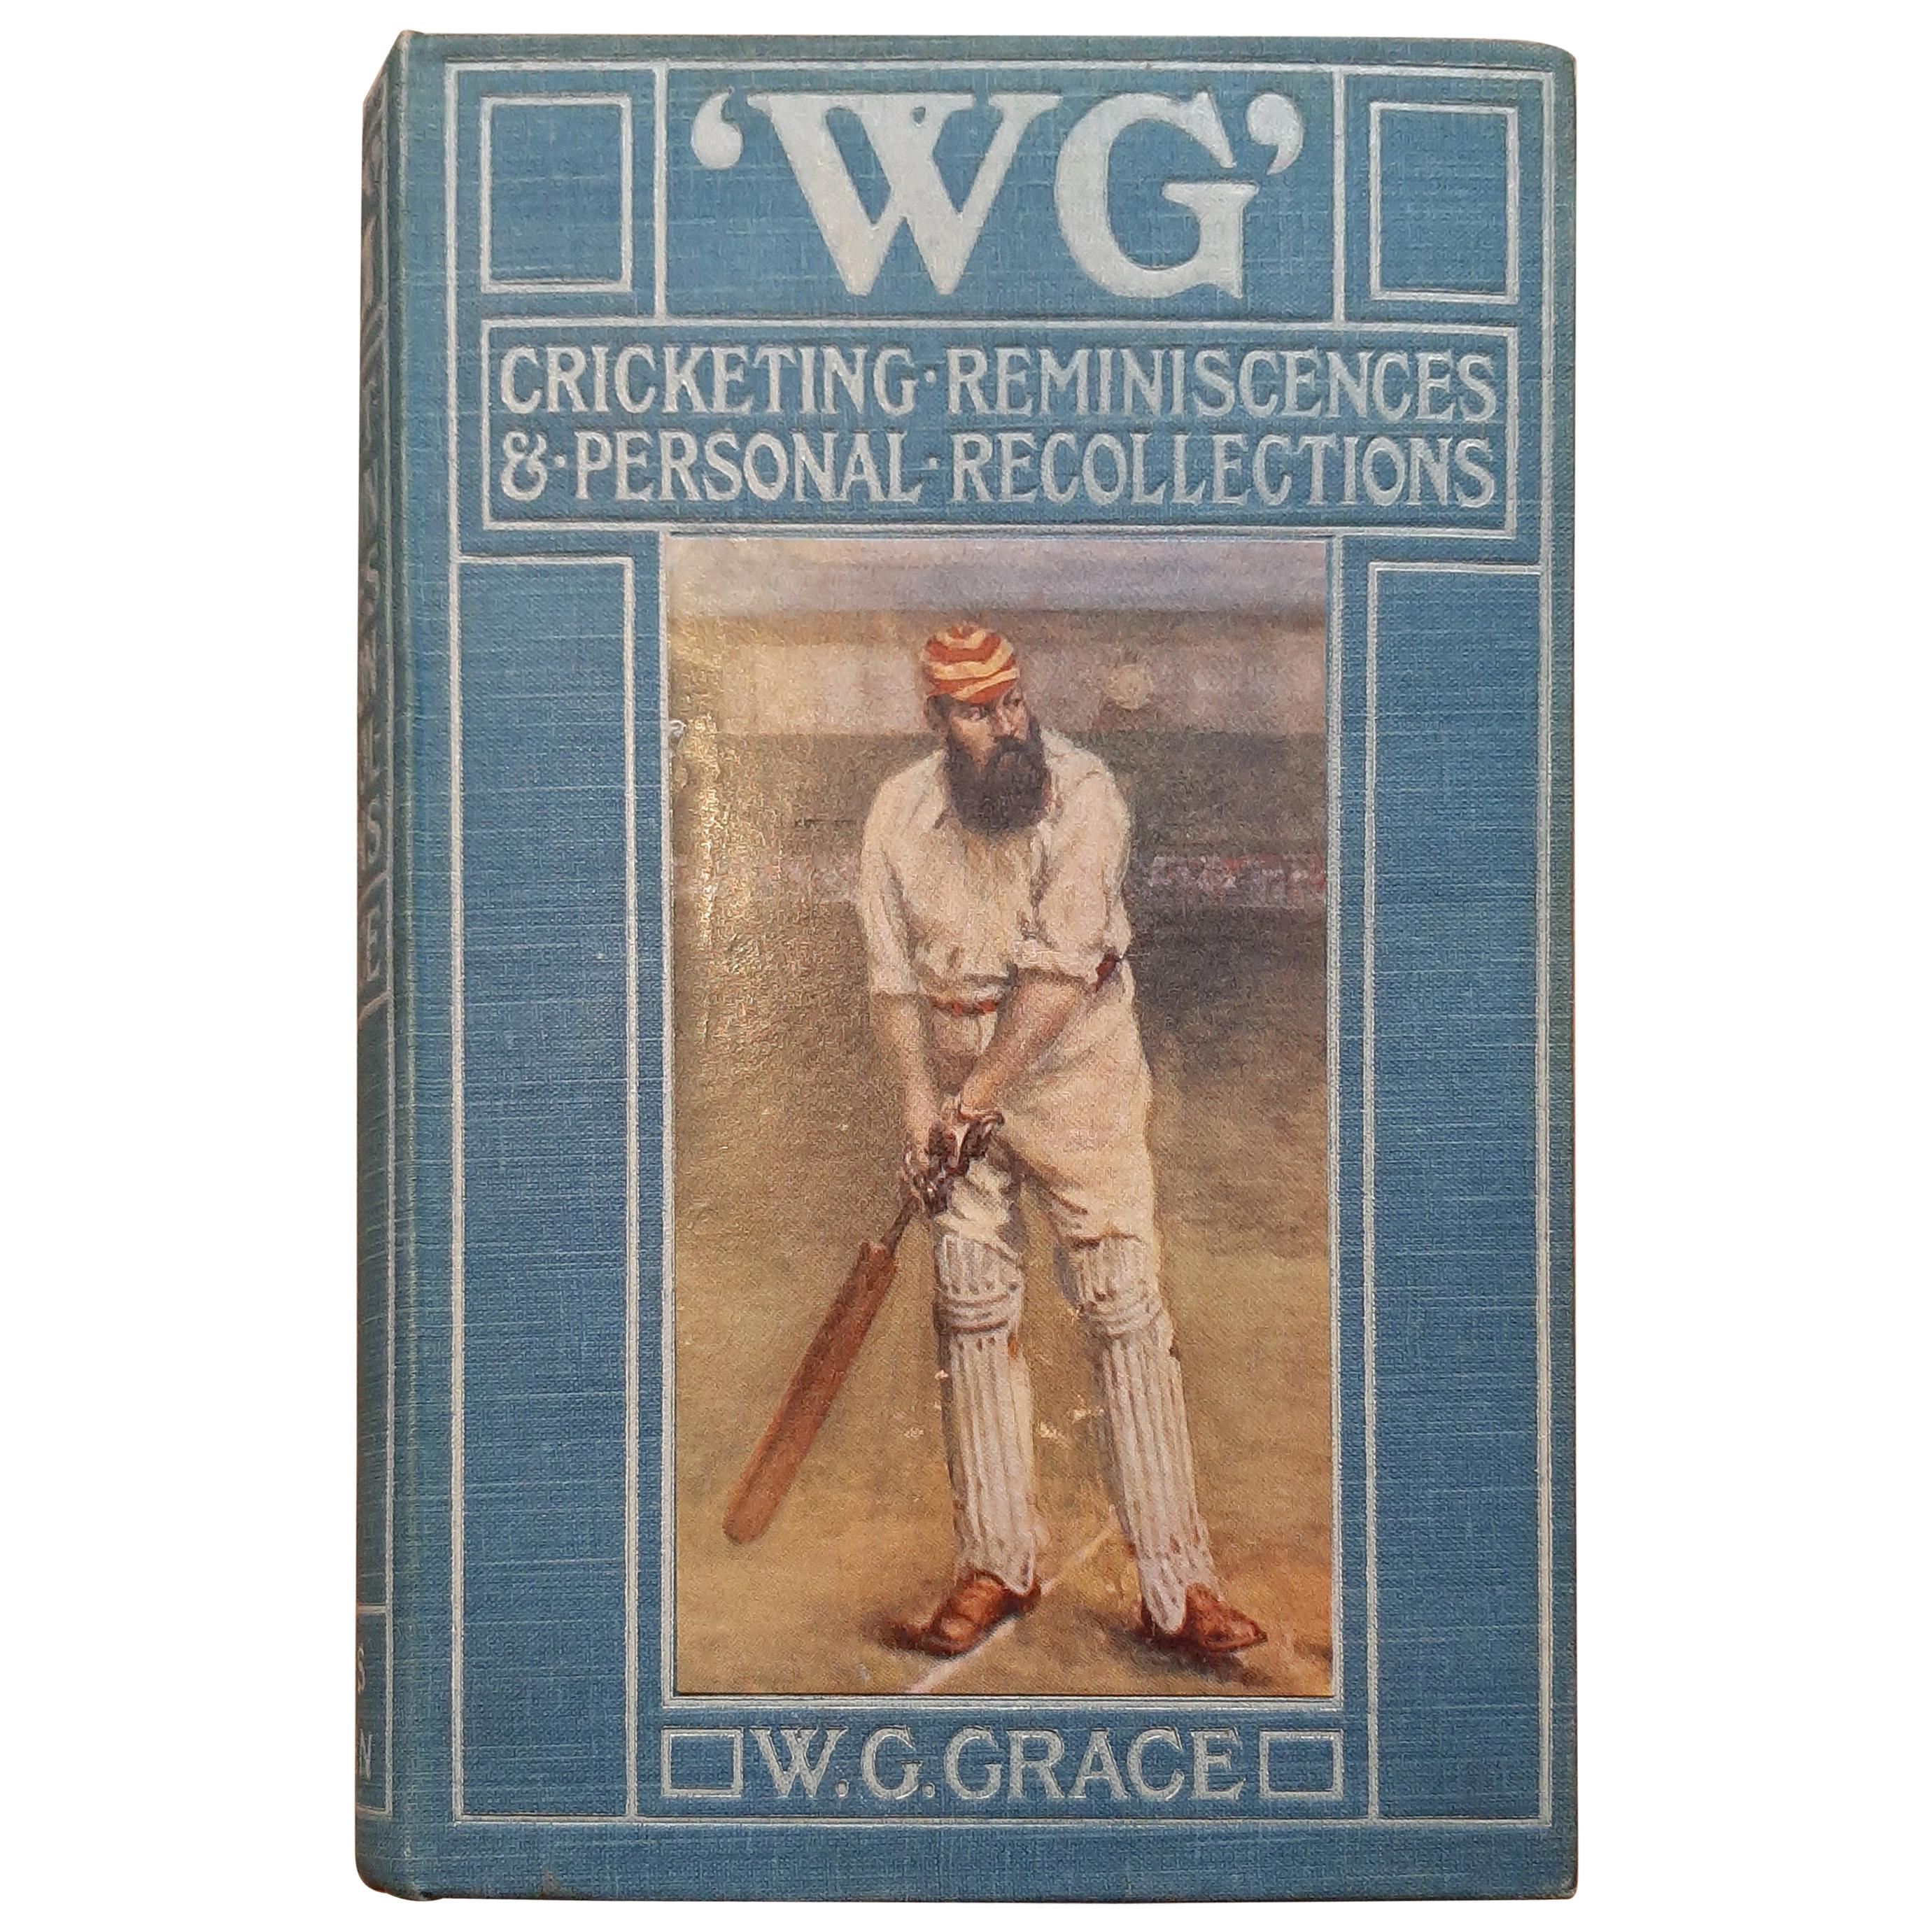 Cricketing Reminiscences by W.G. Grace, 1899